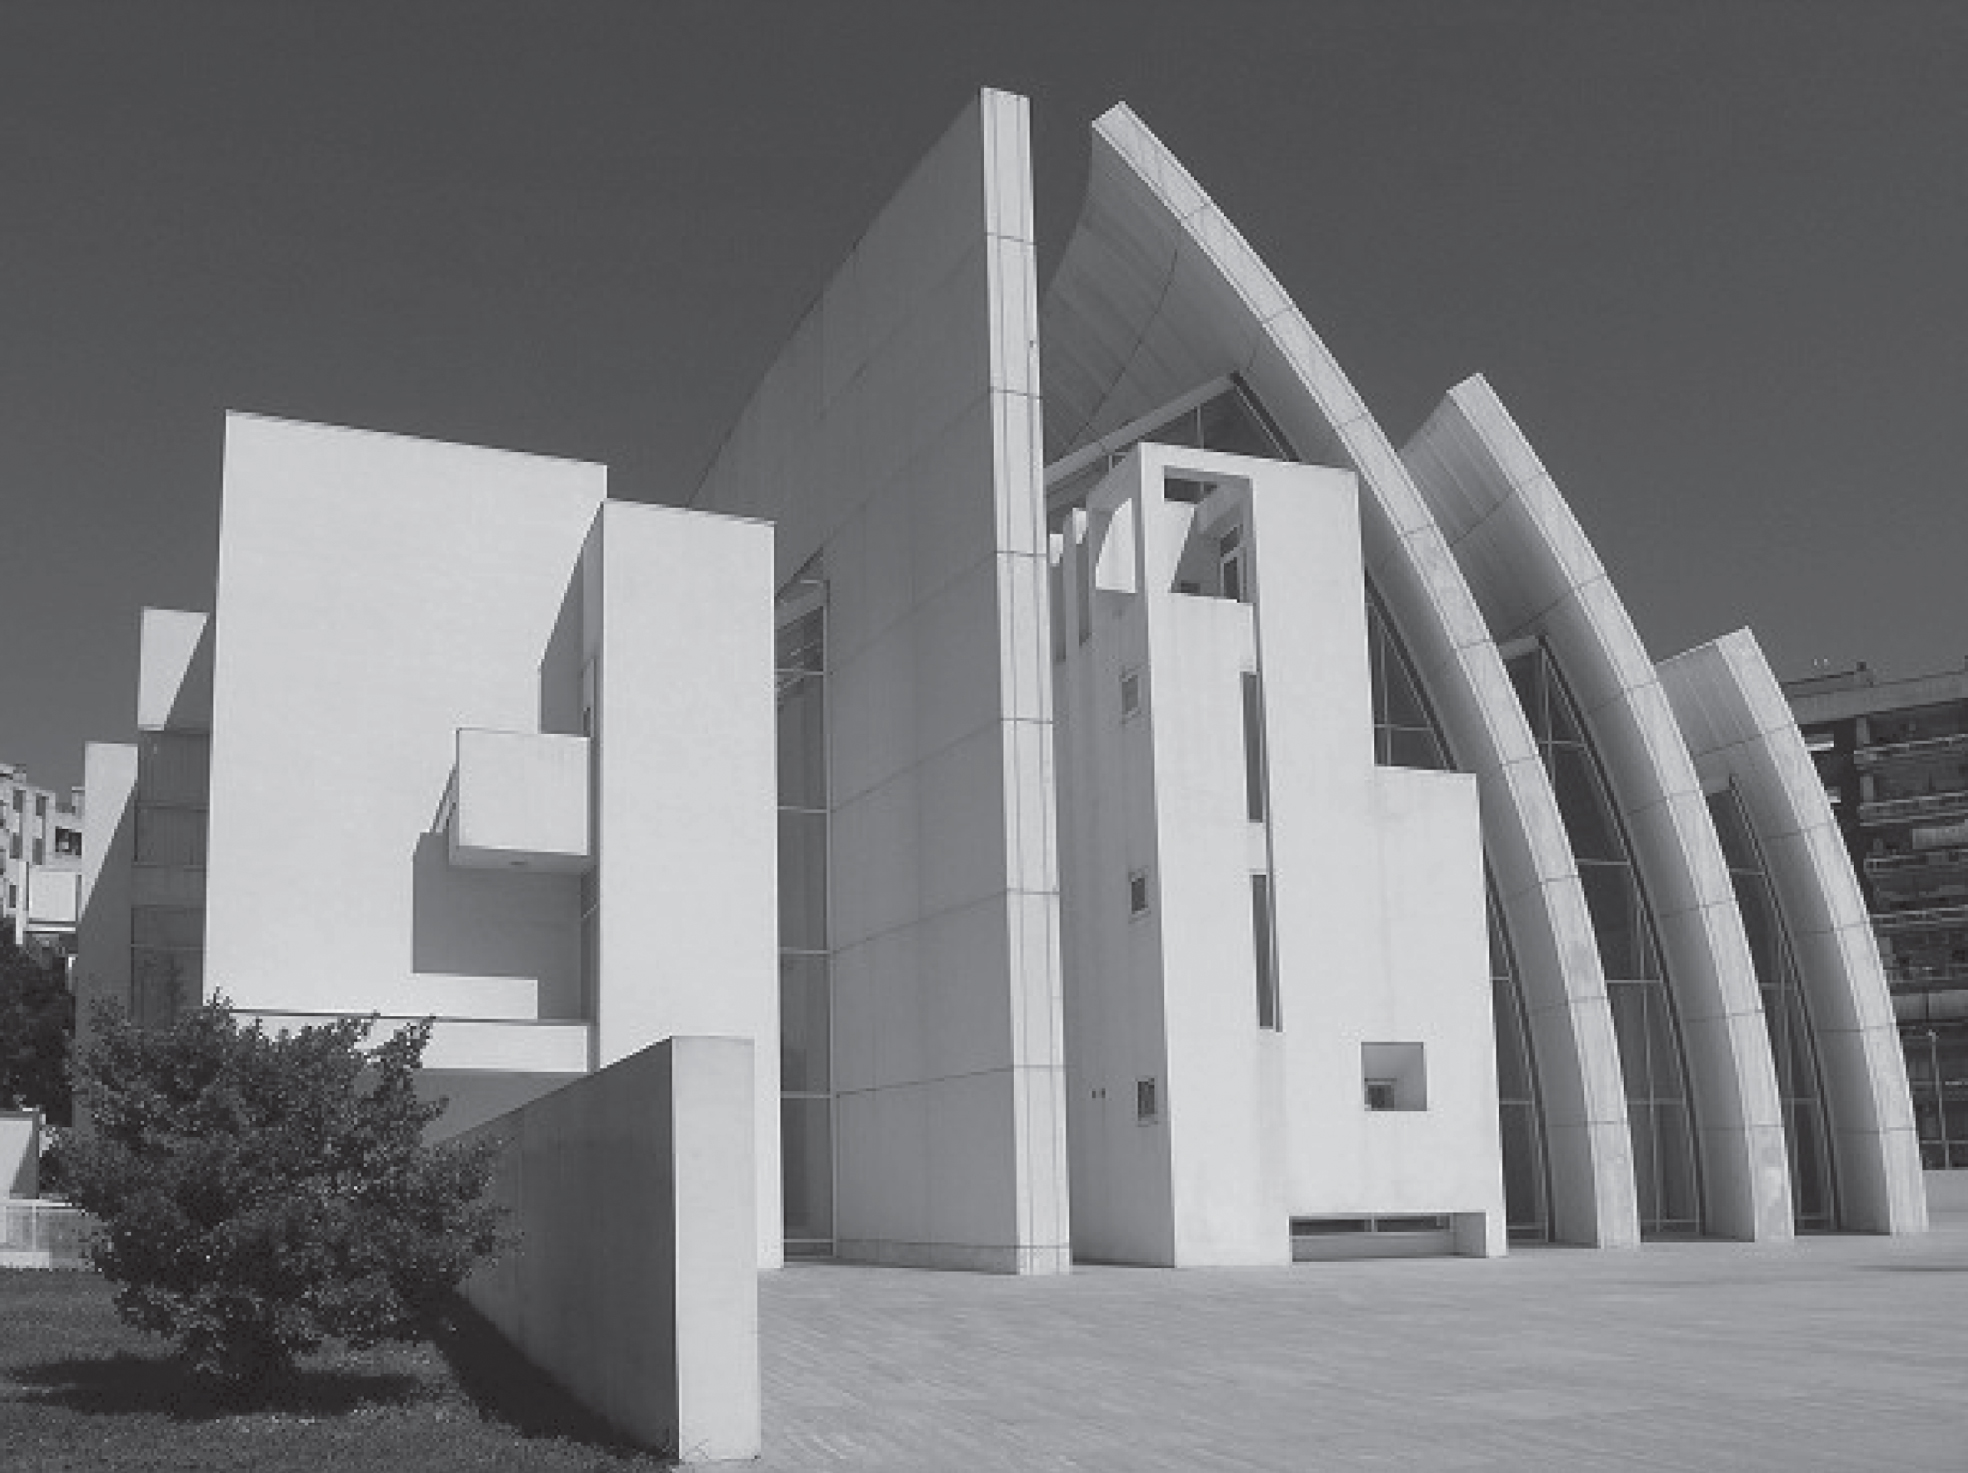 Church Dives in Misericordia, Rome, Italy designed by architect Richard Meier who choose to build the structure using cement containing a significant percentage of titanium dioxide, 2003 (source: http://files1.structurae.de/).